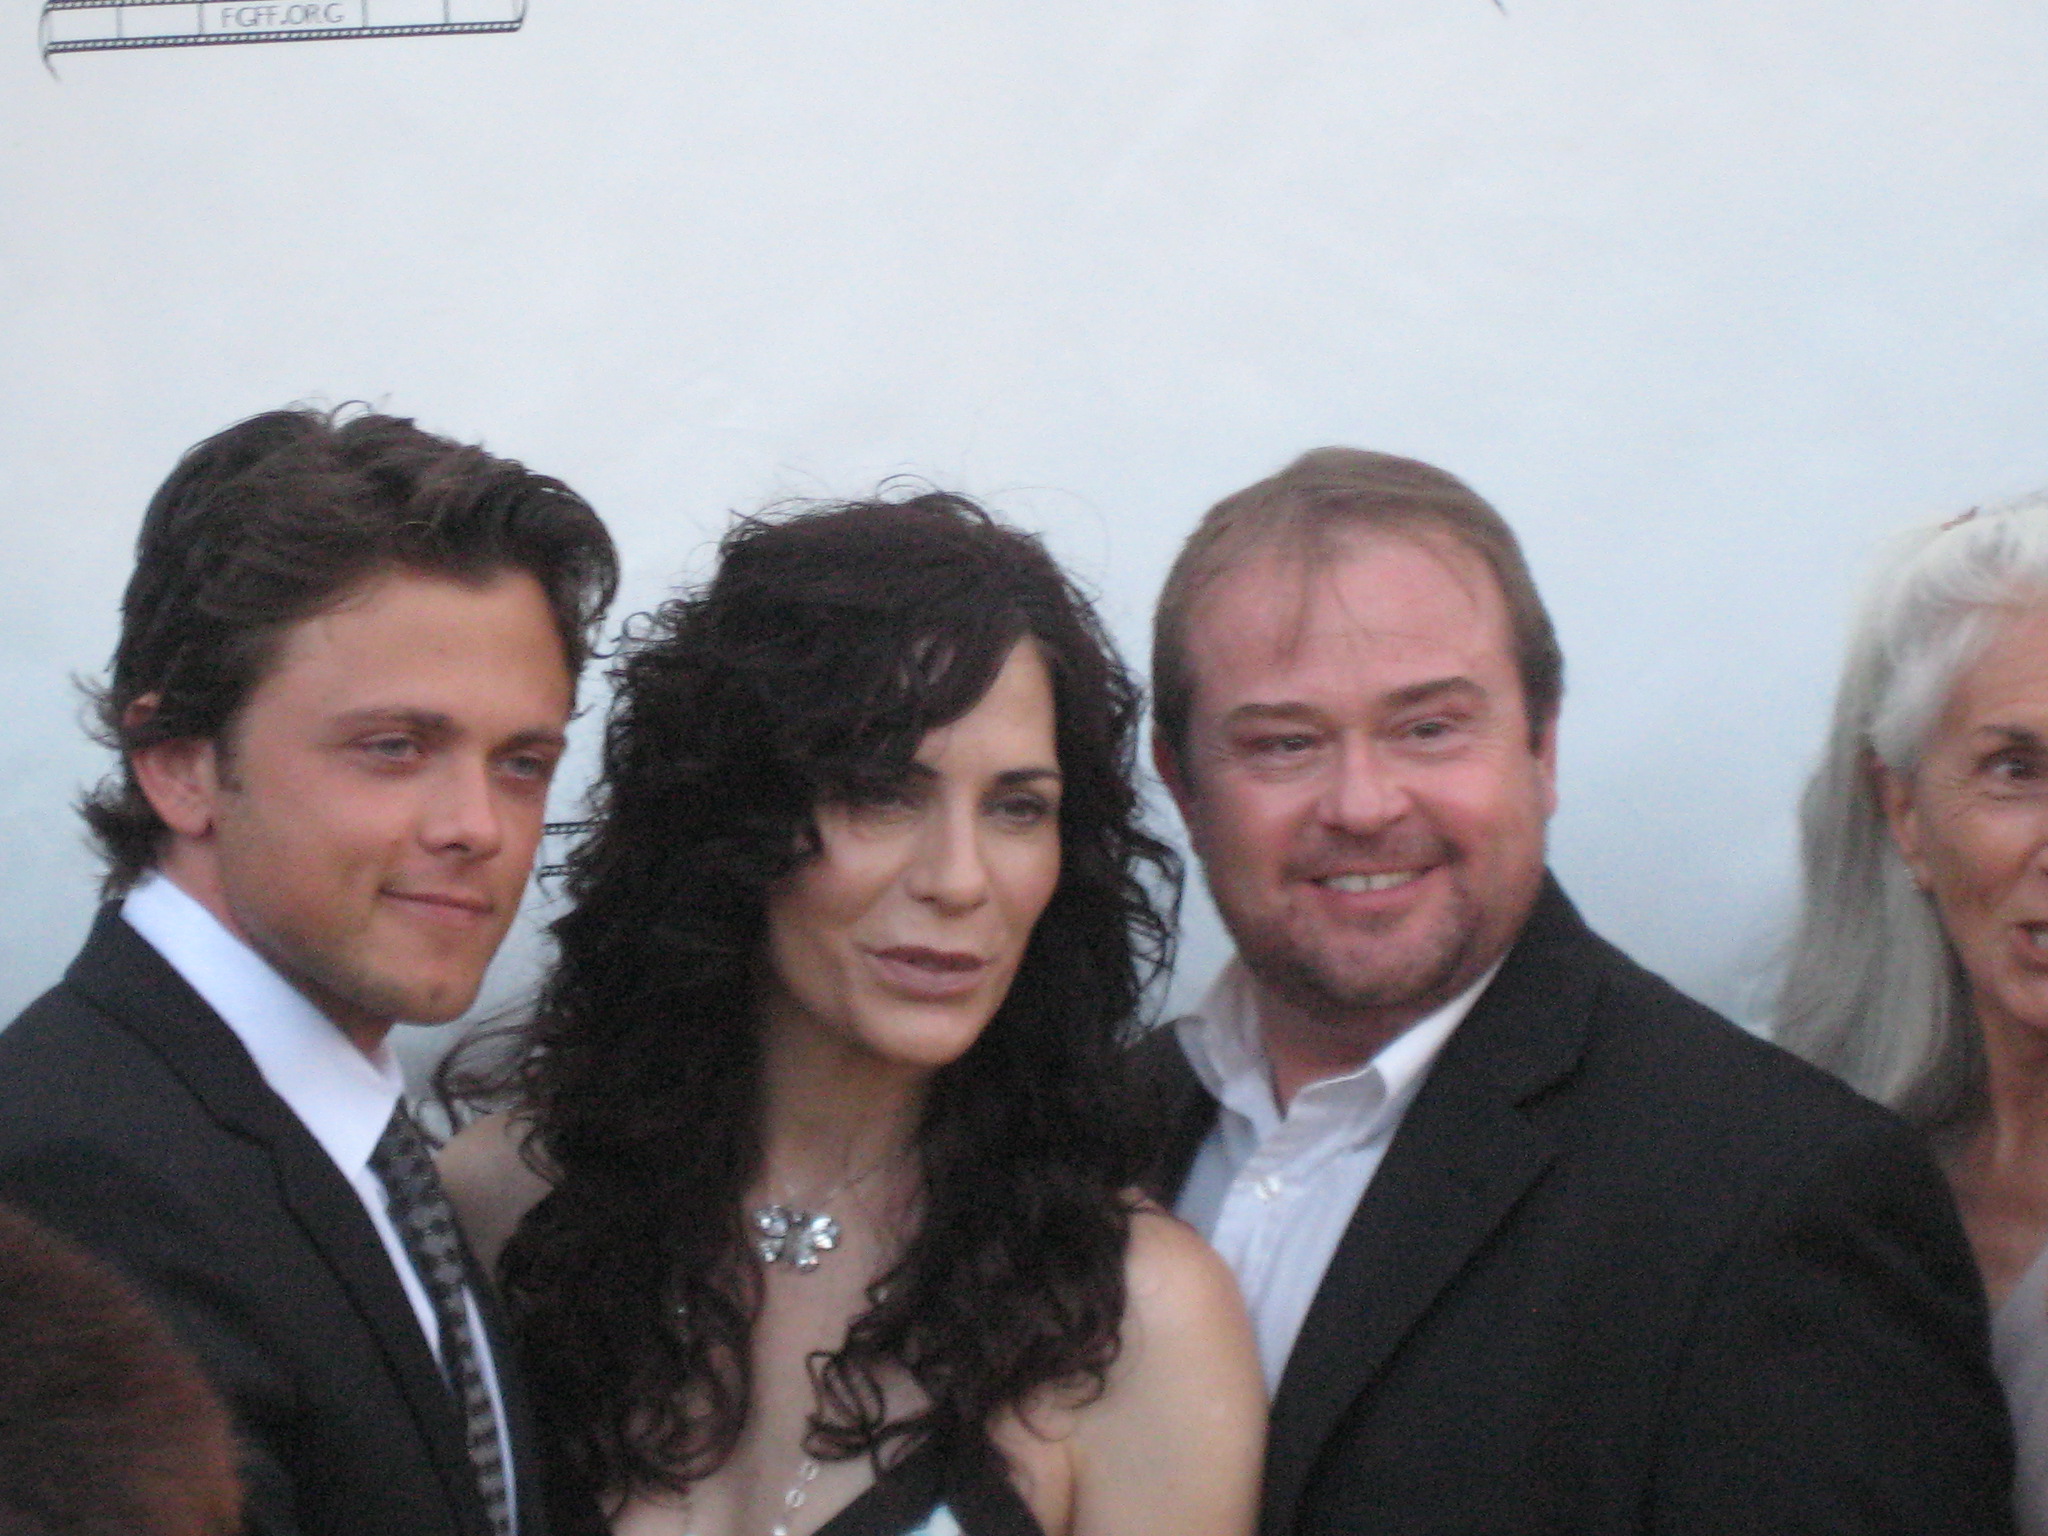 BILLY AND THE HURRICANE cast: Eric Edwards, Holly Gagnier, and Rocky Benoit at the Feel Good Film Festival, Hollywood, CA.